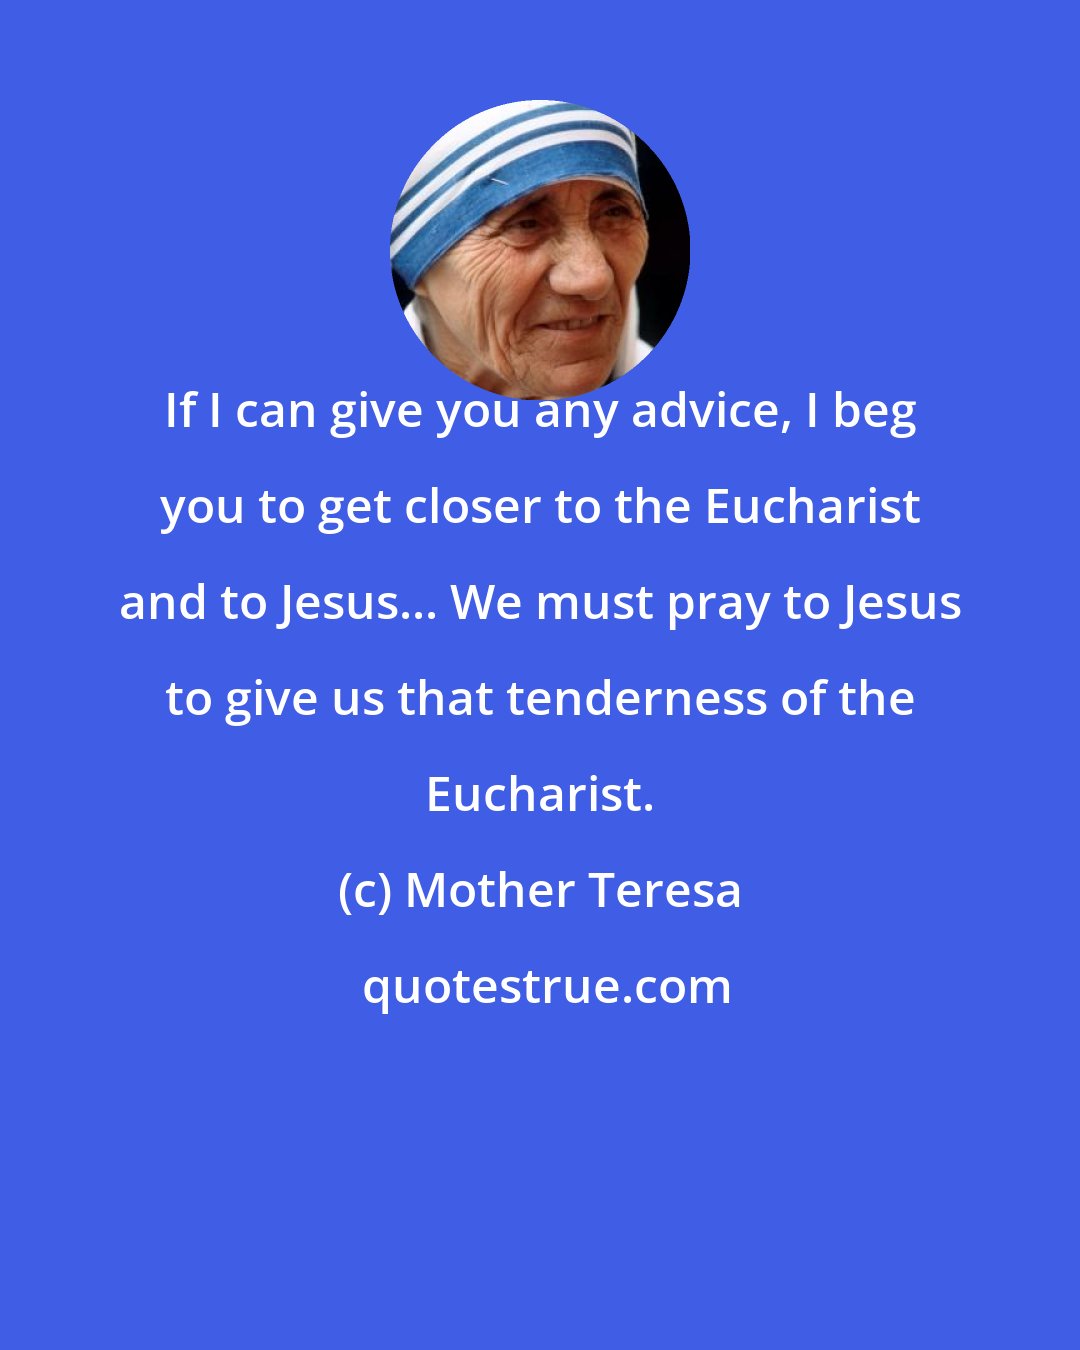 Mother Teresa: If I can give you any advice, I beg you to get closer to the Eucharist and to Jesus... We must pray to Jesus to give us that tenderness of the Eucharist.